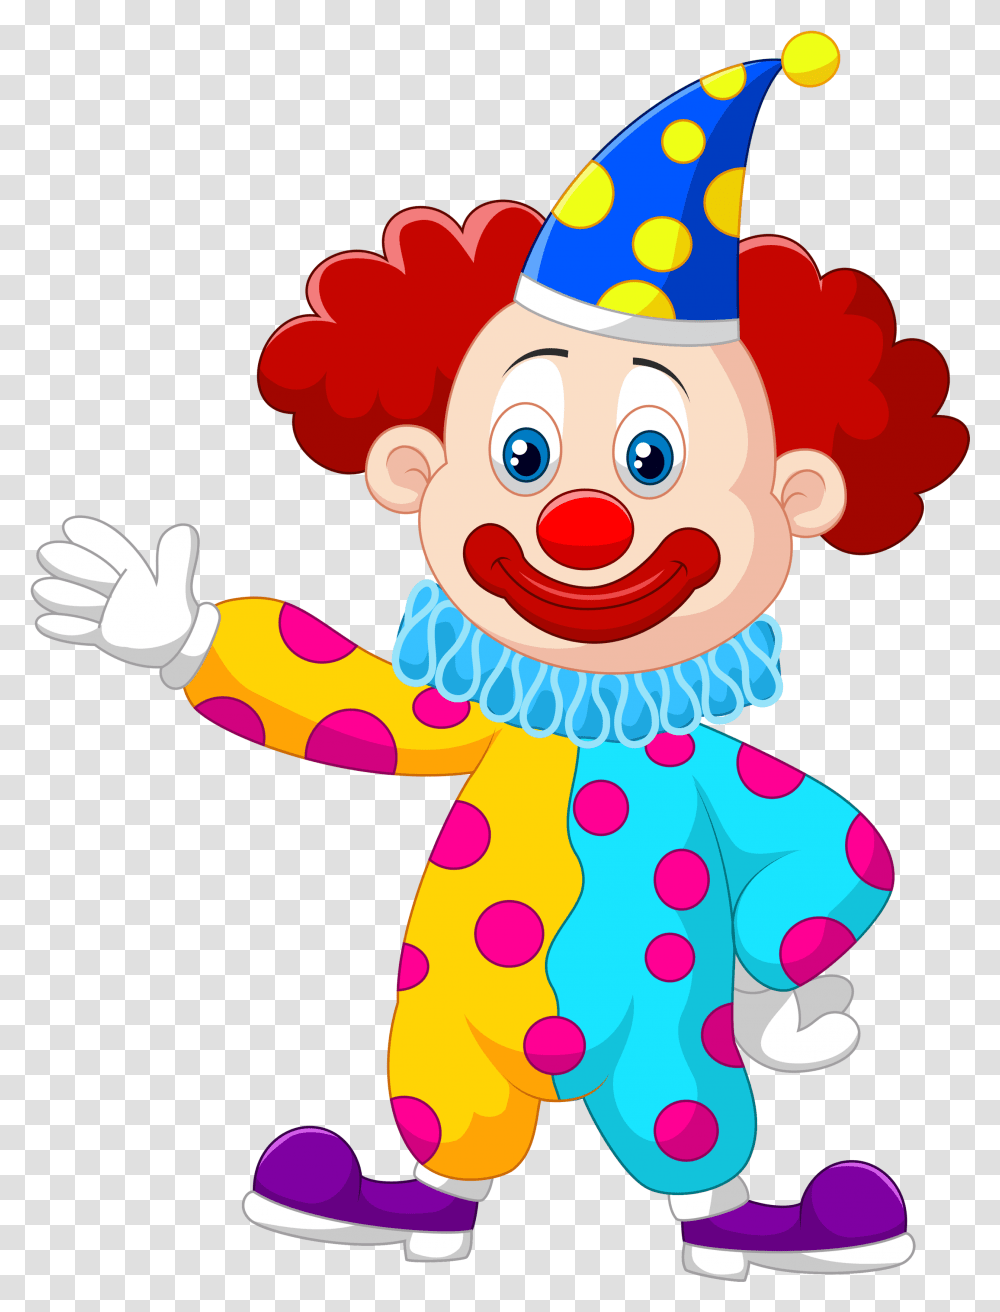 Animals In Circus Animated Clipart Clown Cartoon, Performer, Toy, Leisure Activities, Magician Transparent Png